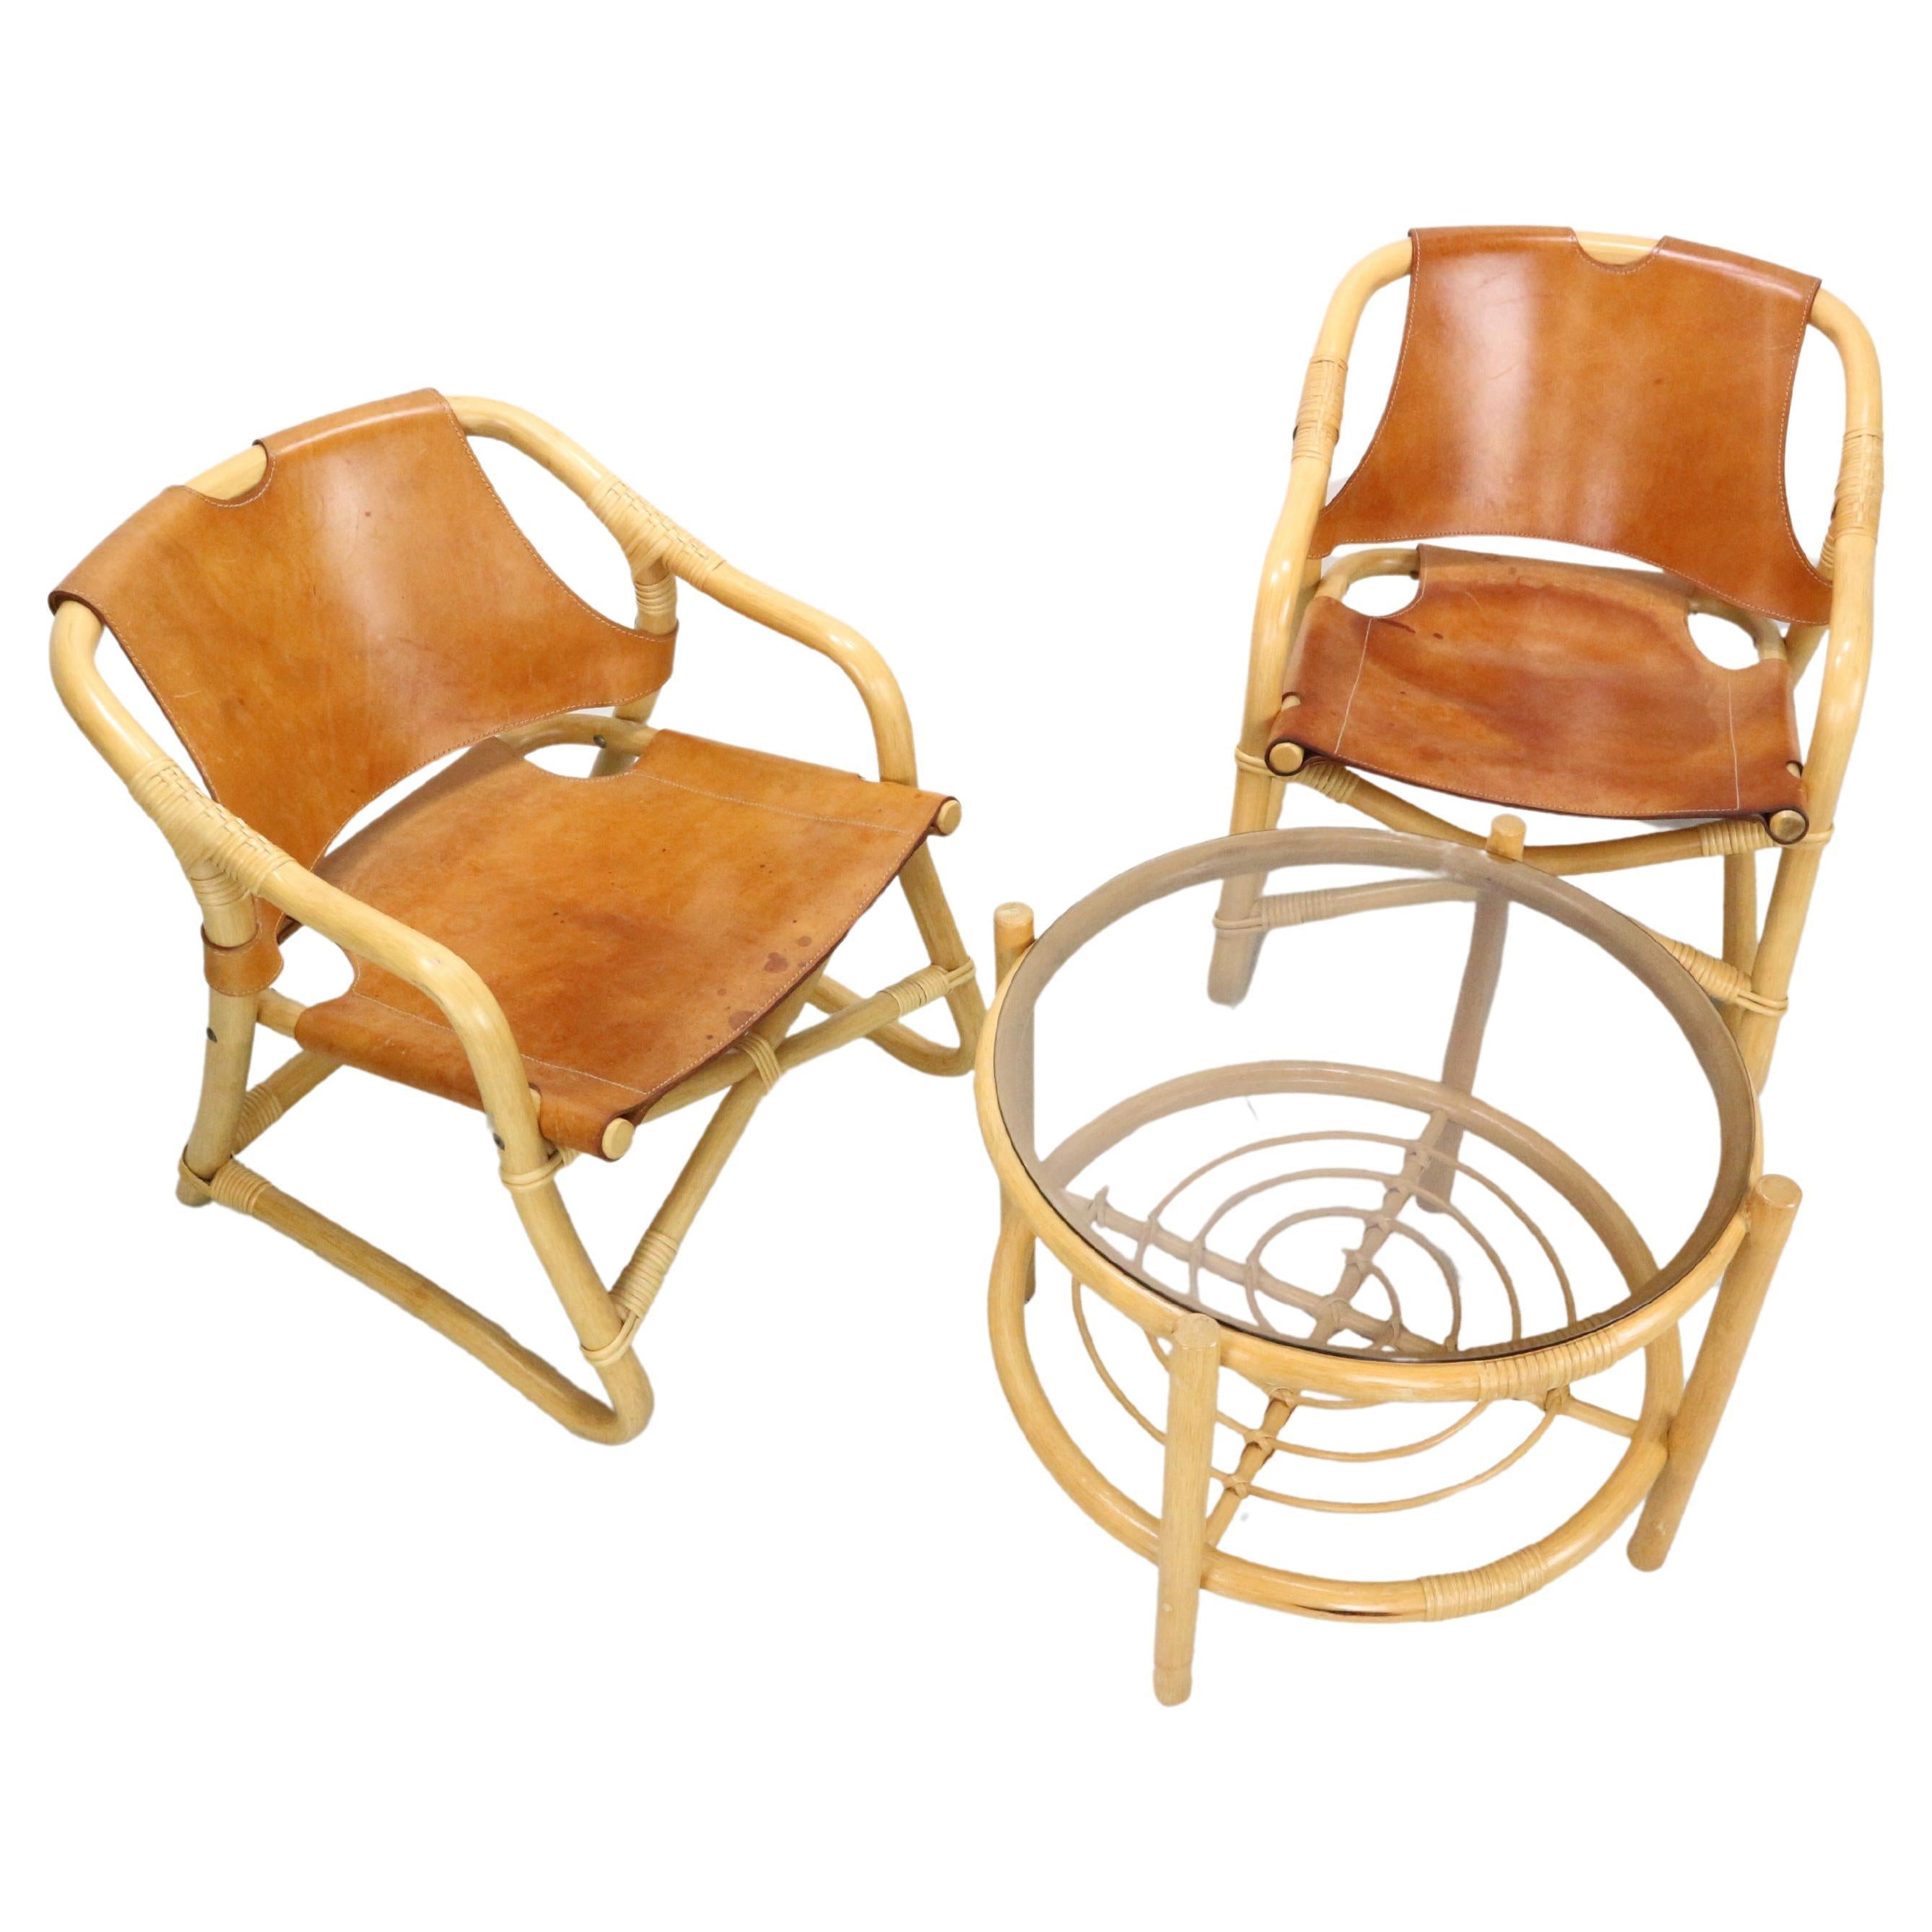 Danish Modern "Manilla" Lounge Chairs + table, Bamboo and Saddle Leather, 1960's For Sale